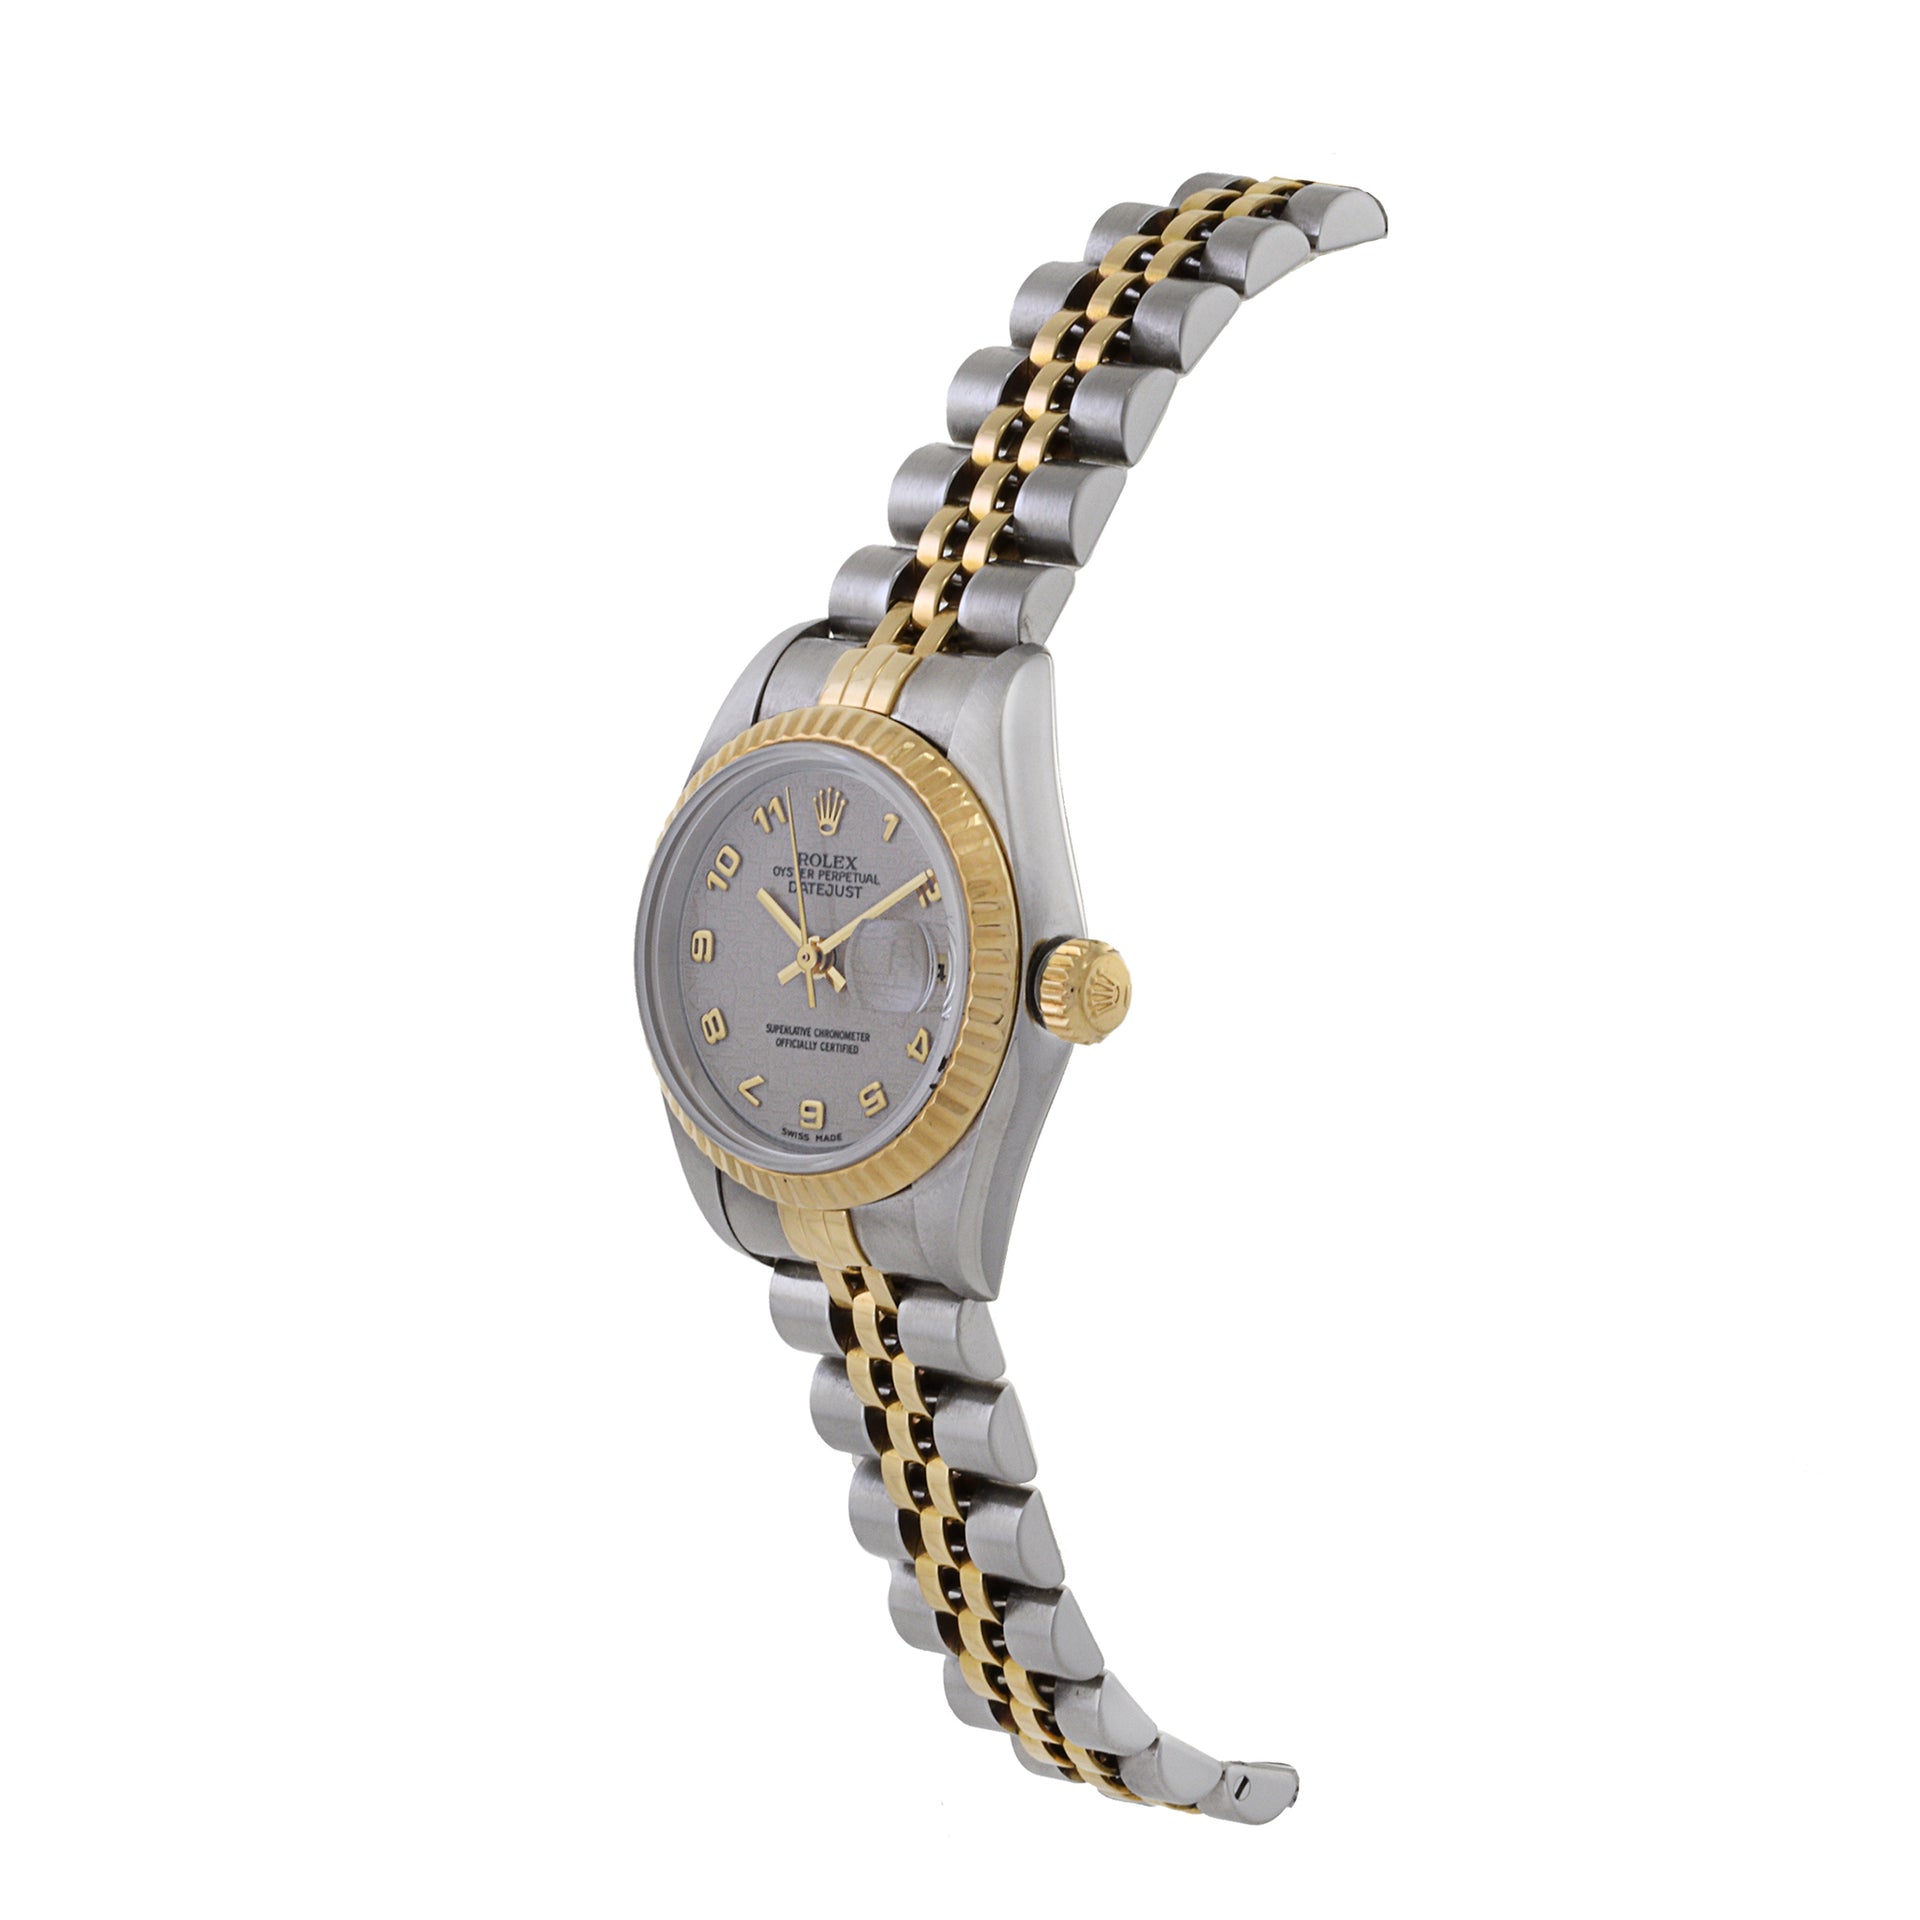 Rolex Lady Datejust Reference 69173 26mm Anniversary Dial Stainless Steel and 18K Yellow Gold